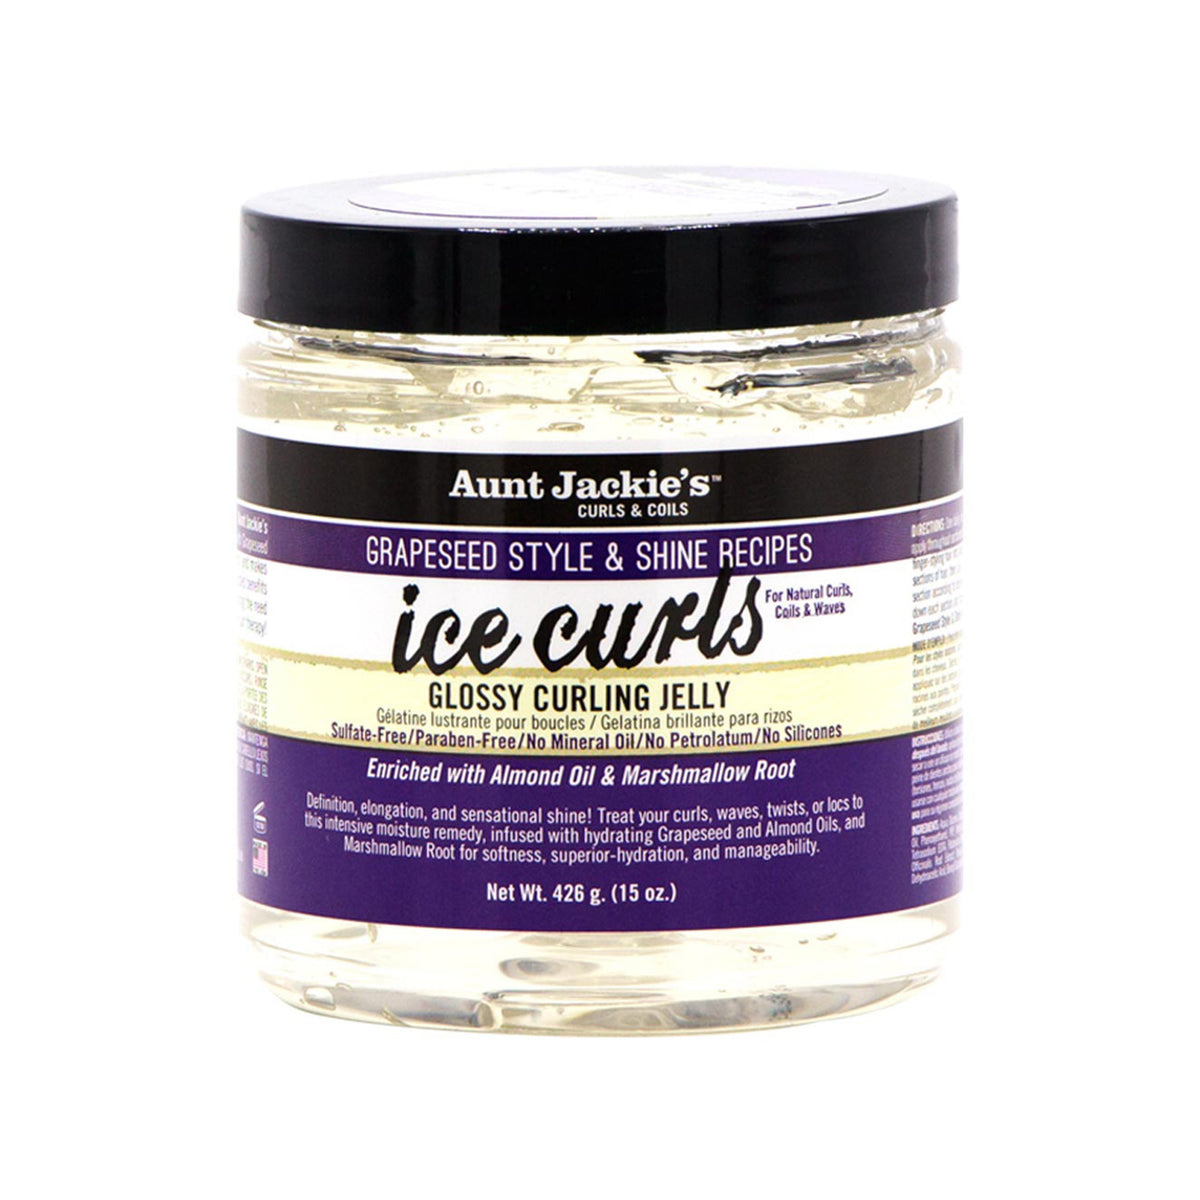 Aunt Jackies Ice Curls Glossy Curling Jelly 15 oz - AQ Online